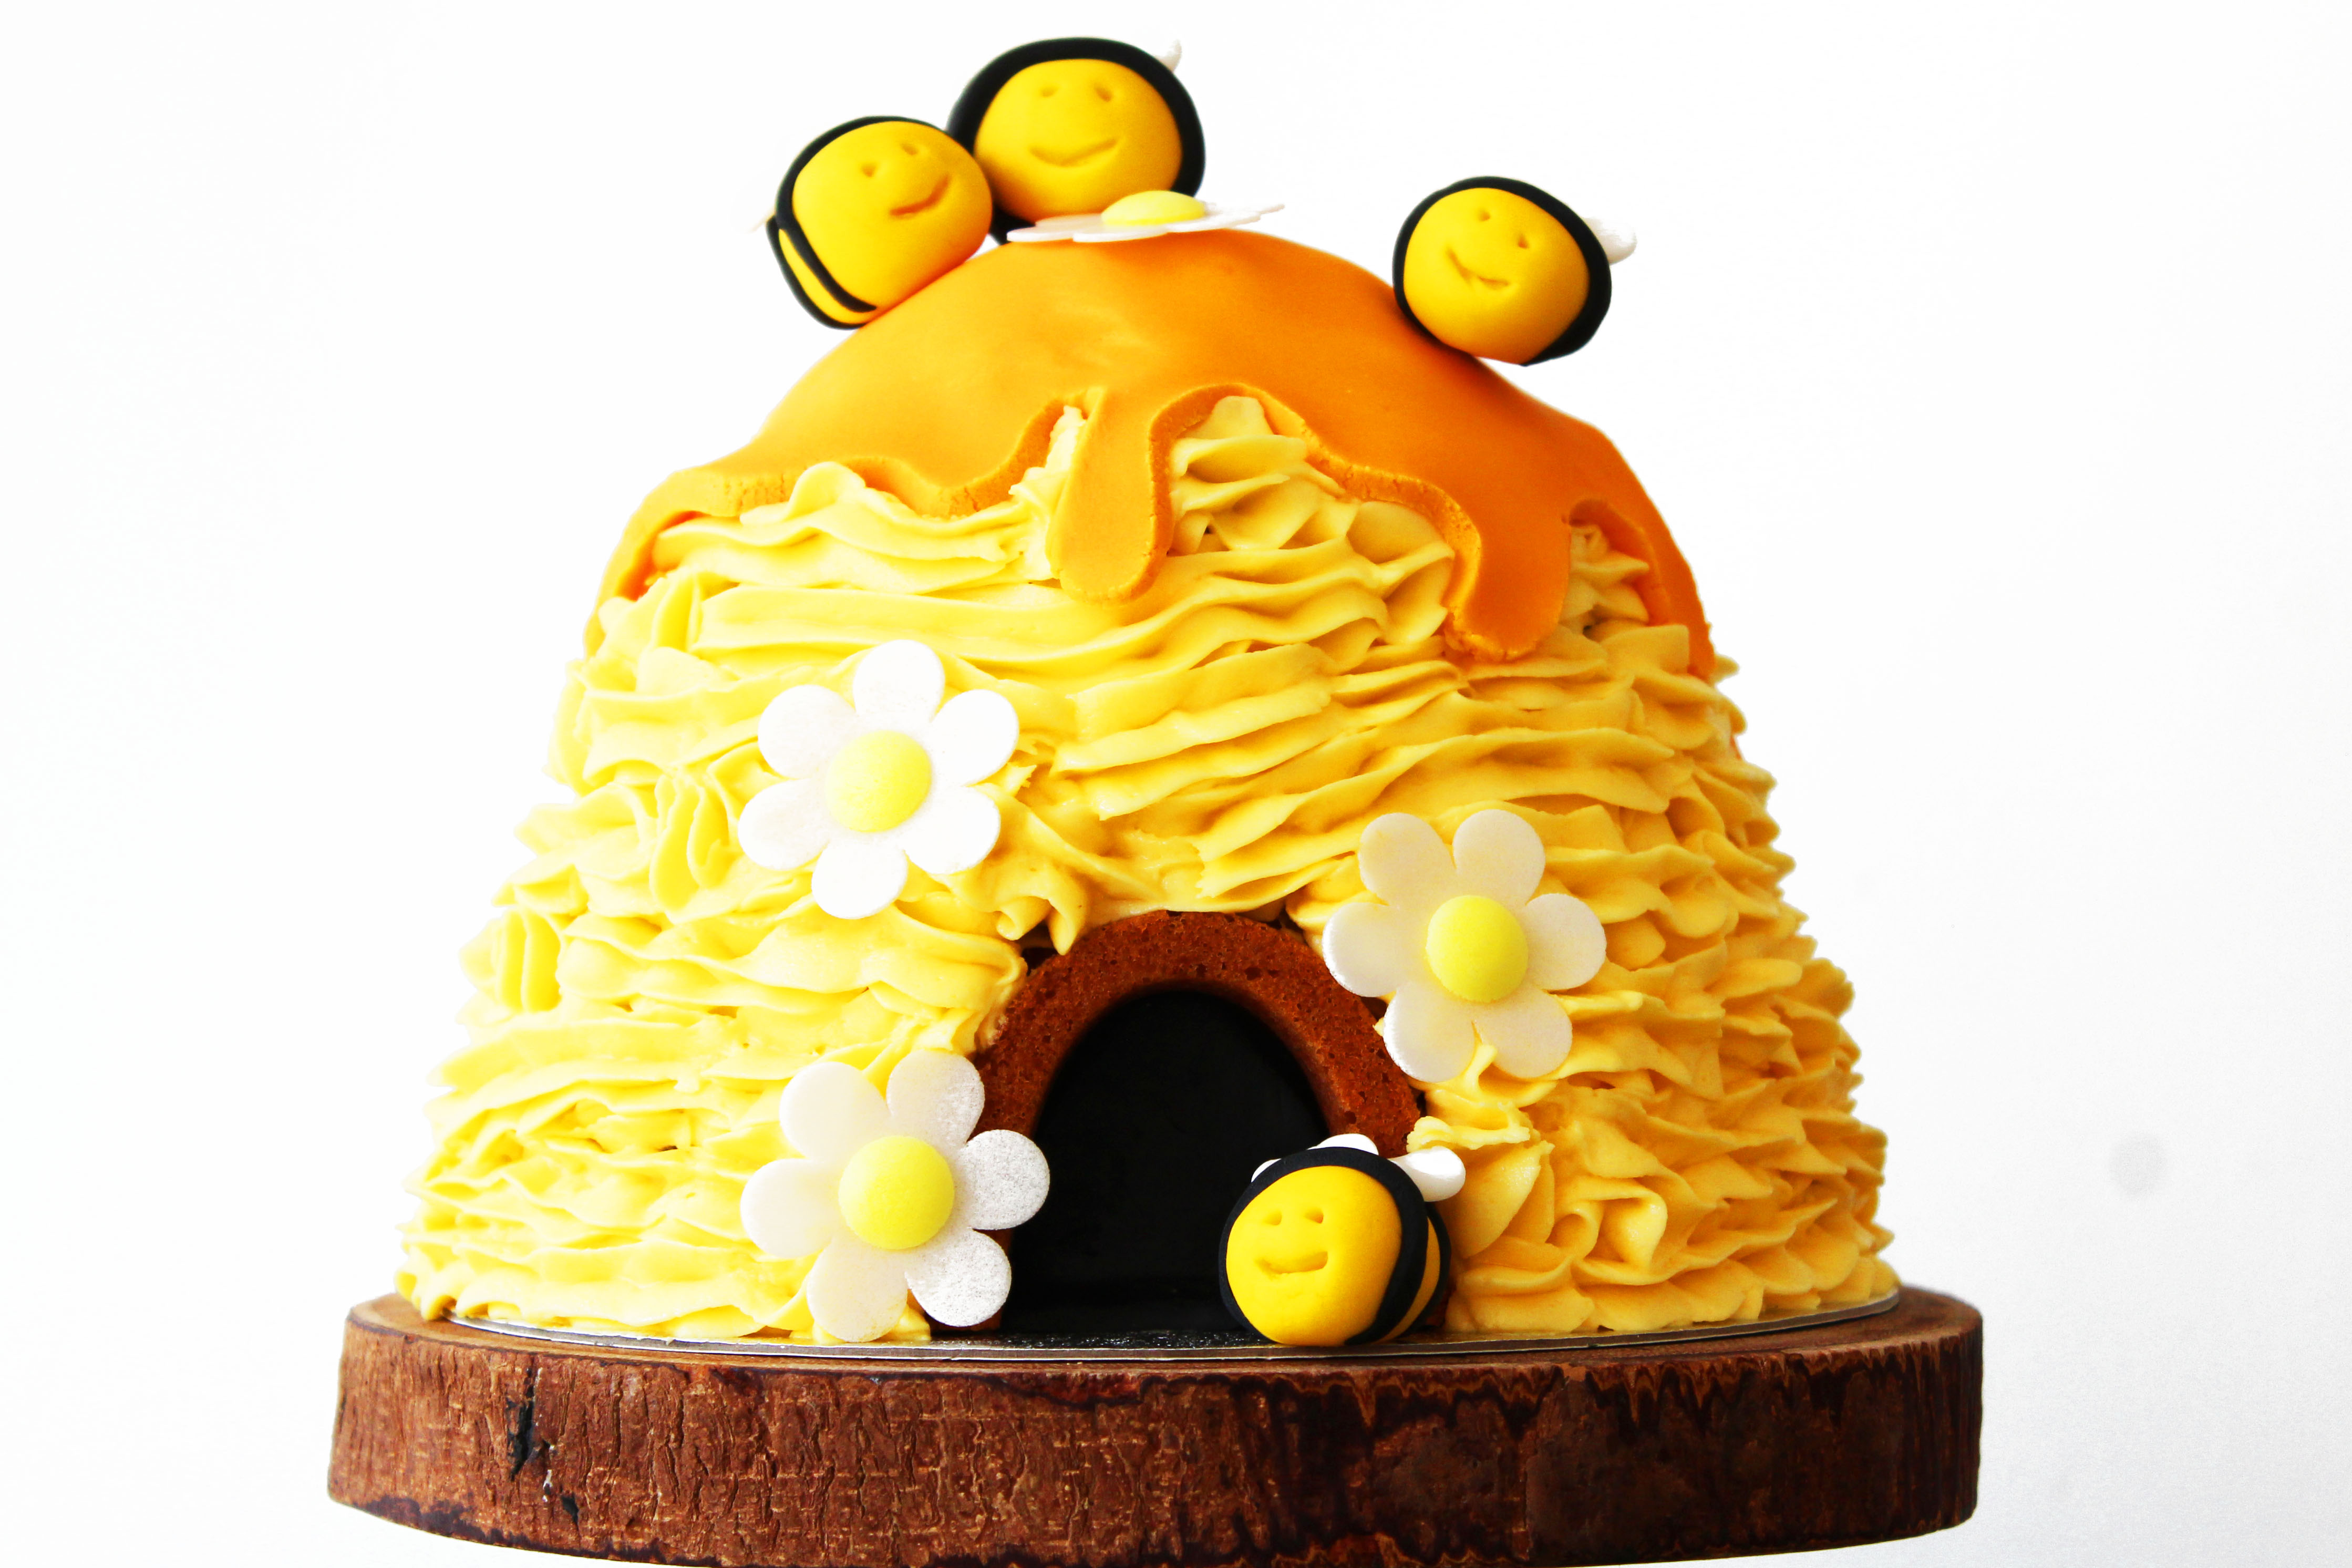 3D Beehive Cake with honey drips and buzzing bees